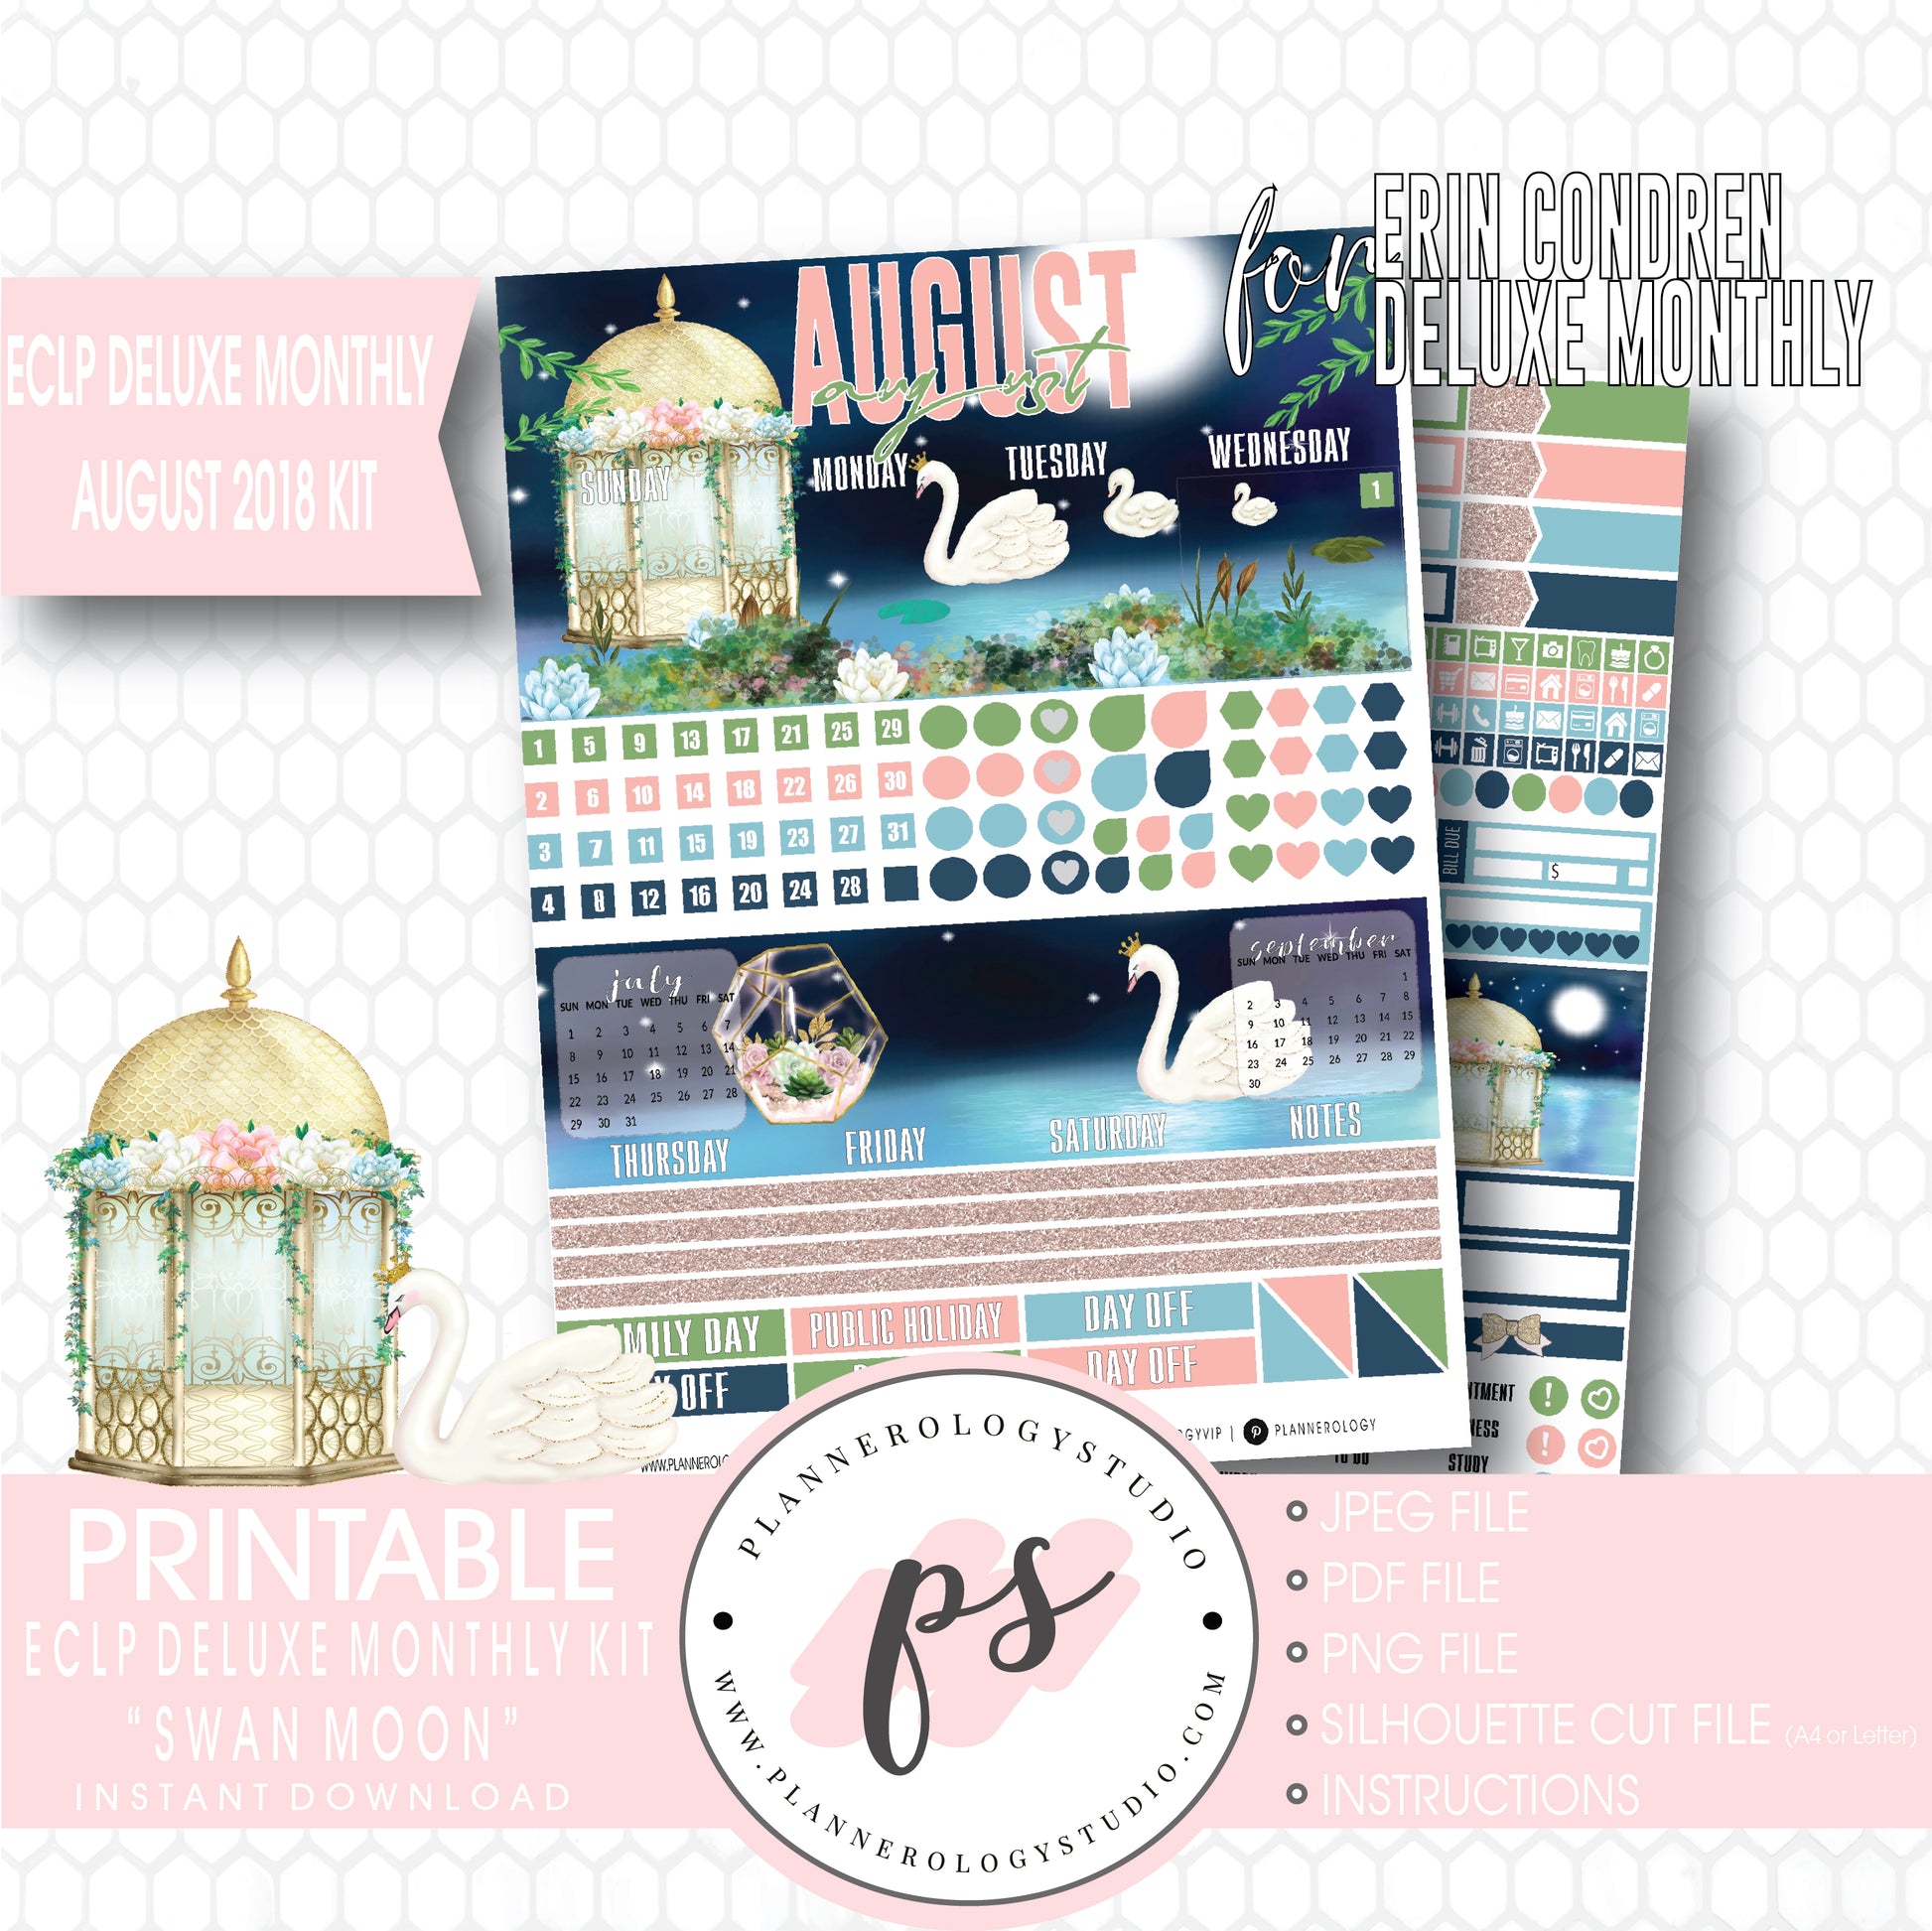 Swan Moon August 2018 Monthly View Kit Digital Printable Planner Stickers (for use with Erin Condren Deluxe Monthly Planner) - Plannerologystudio